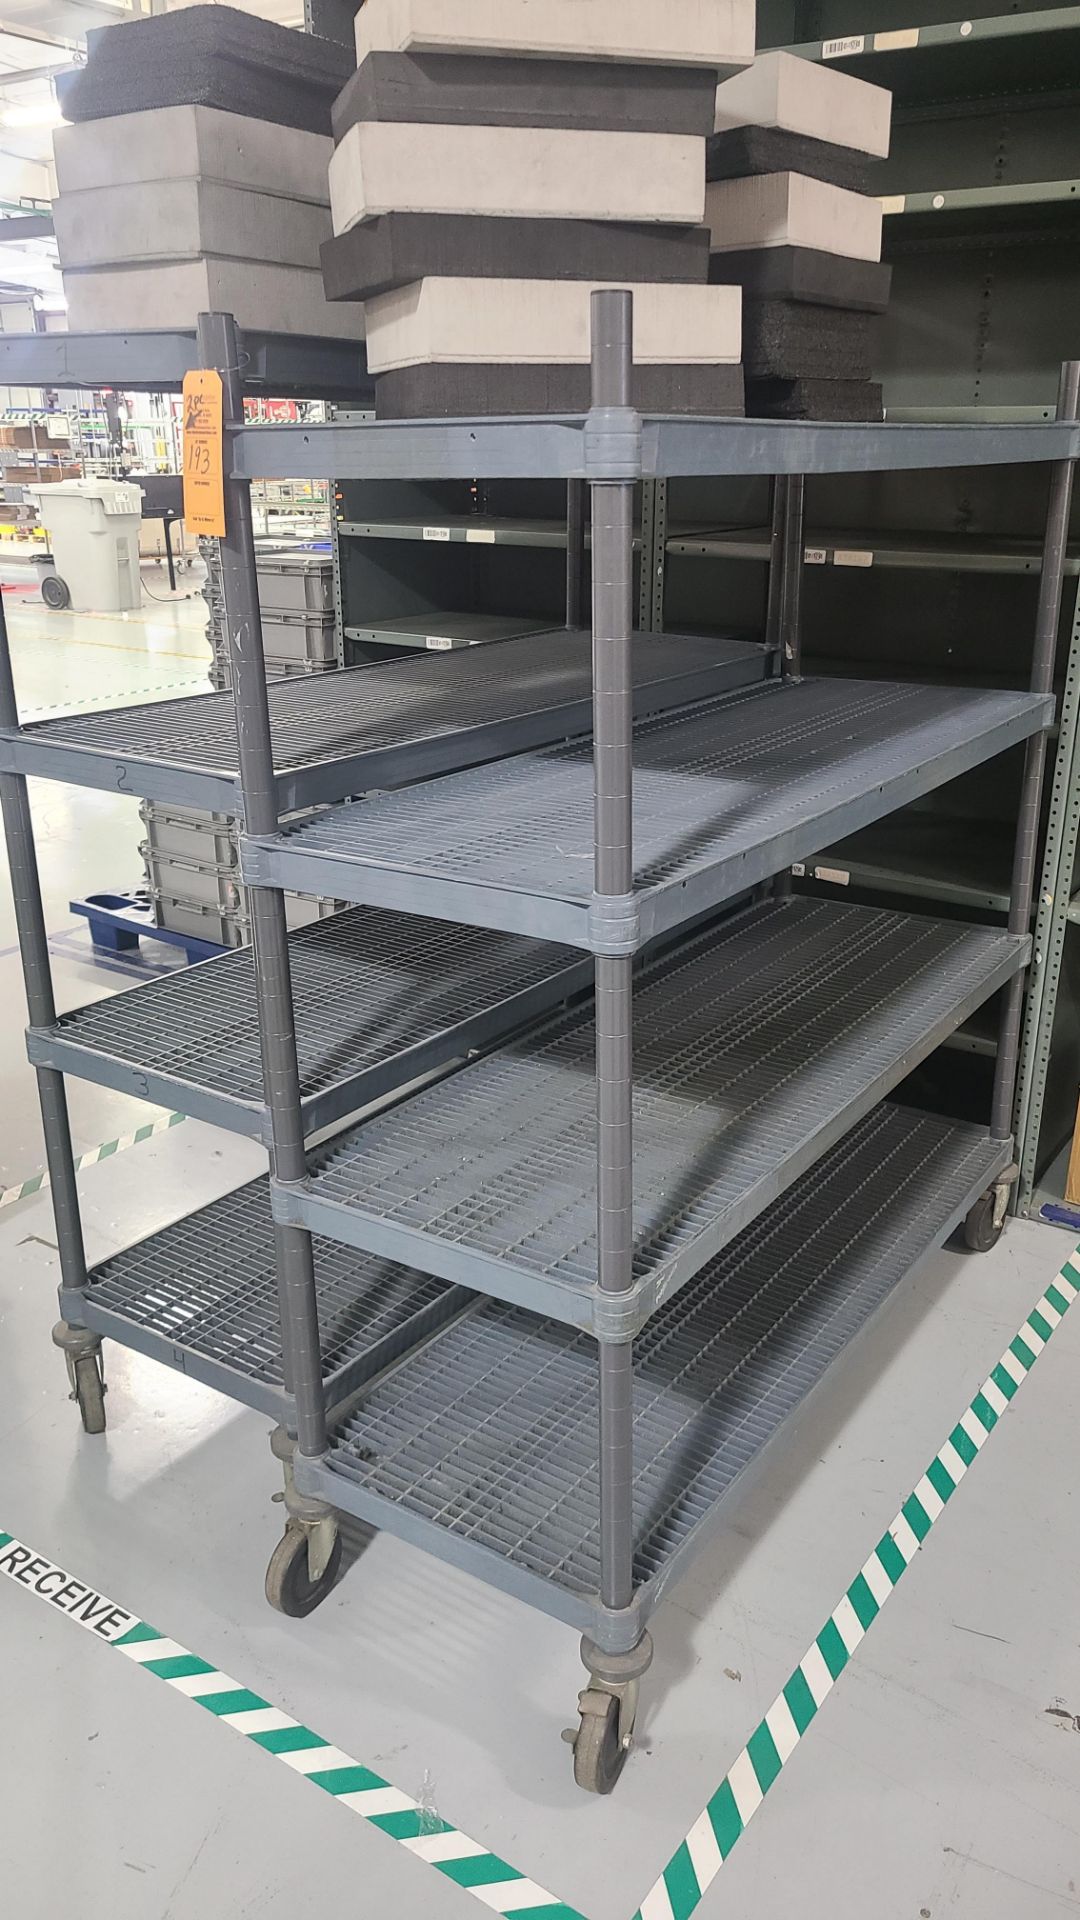 (2) METRO RACKS WITH STEEL UPRIGHTS AND PLASTIC SHELVES